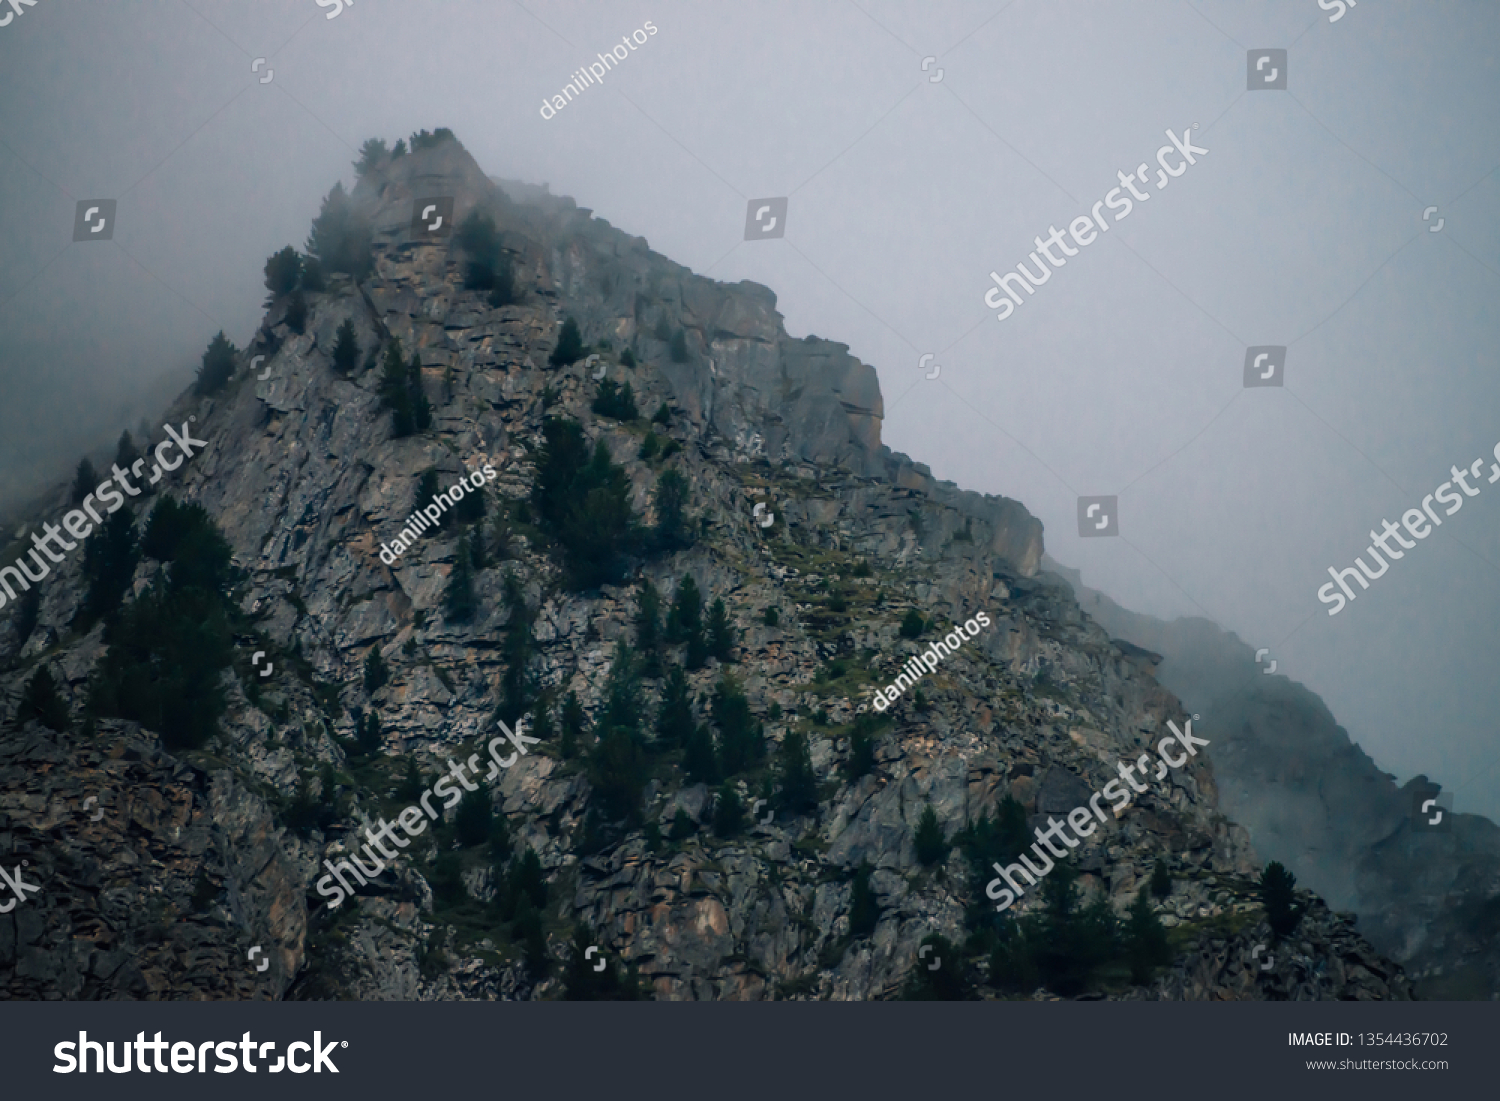 Ghostly giant rocks with trees in thick fog. Mysterious huge mountain in mist. Early morning in mountains. Impenetrable fog. Dark atmospheric eerie landscape. Tranquil mystic atmosphere of wilderness. #1354436702